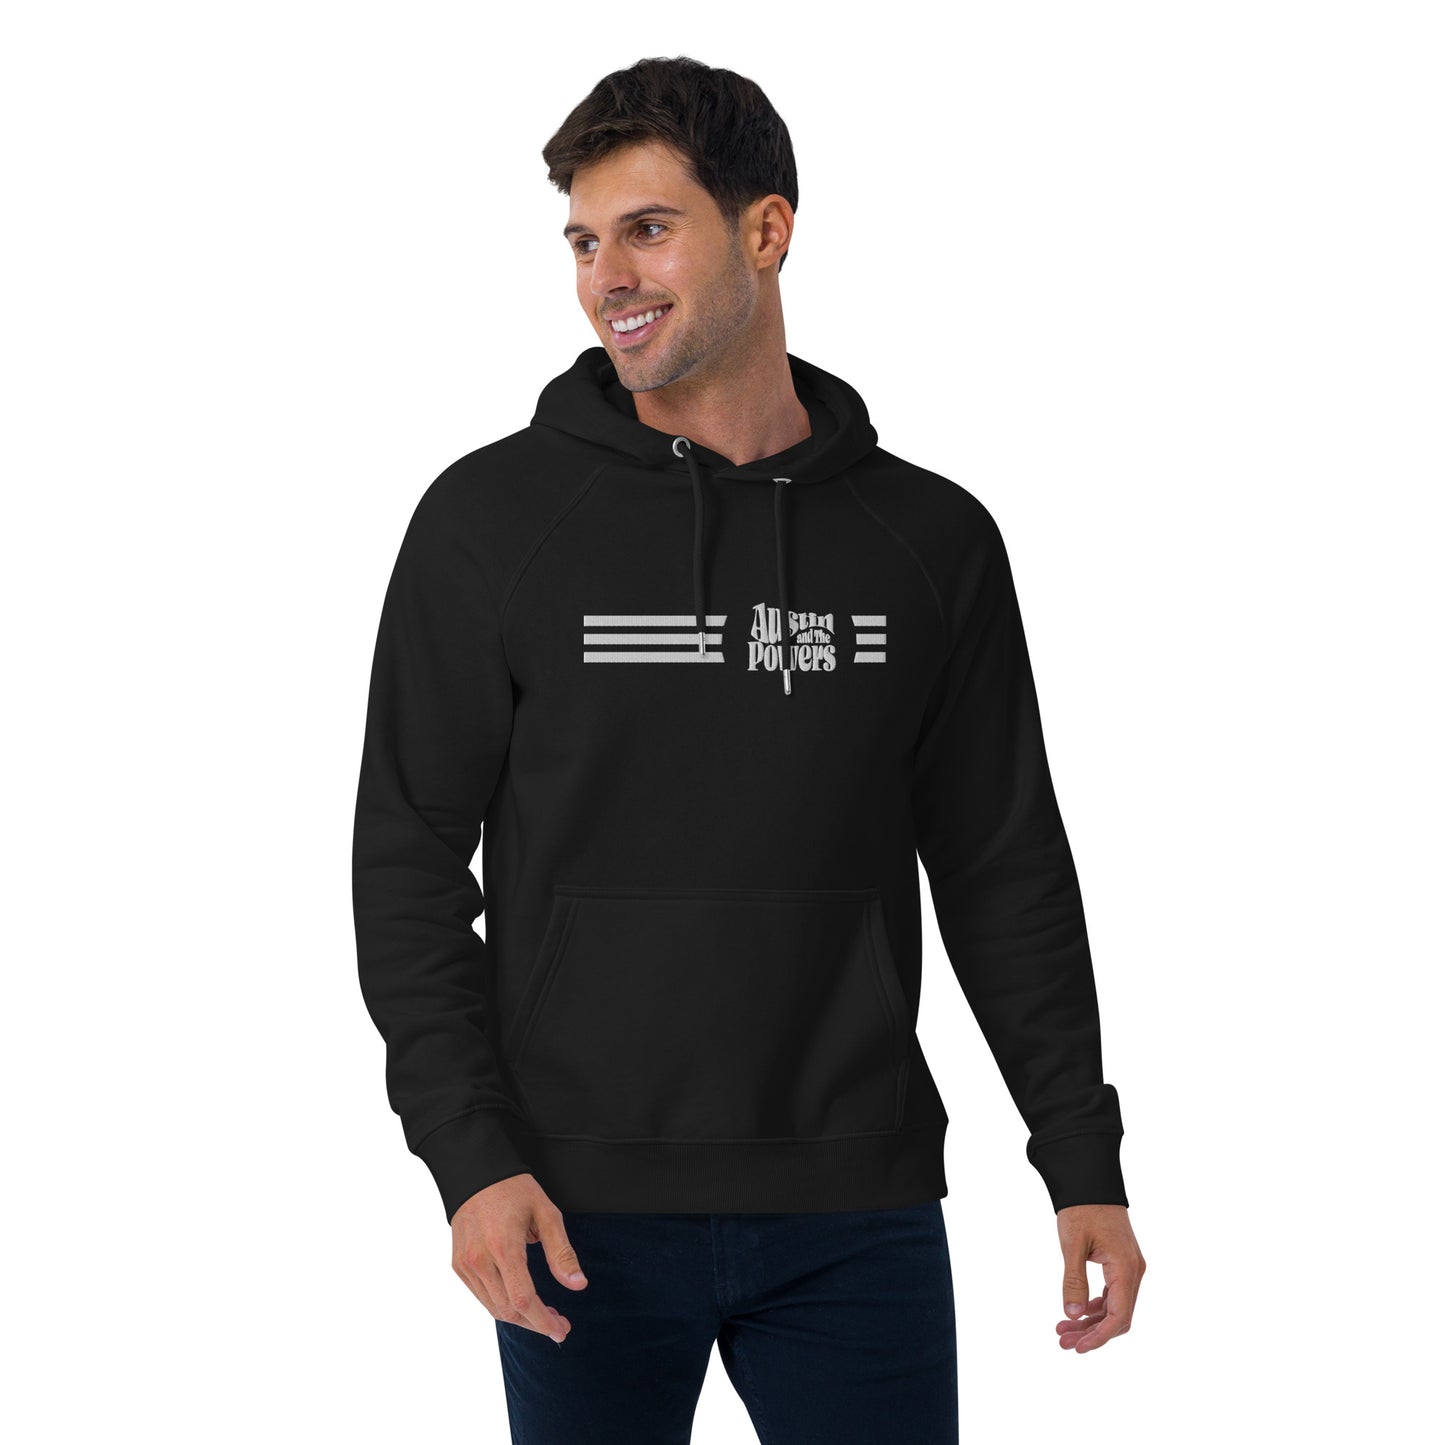 07 - Beachy Unisex Hoodie (Embroidered)